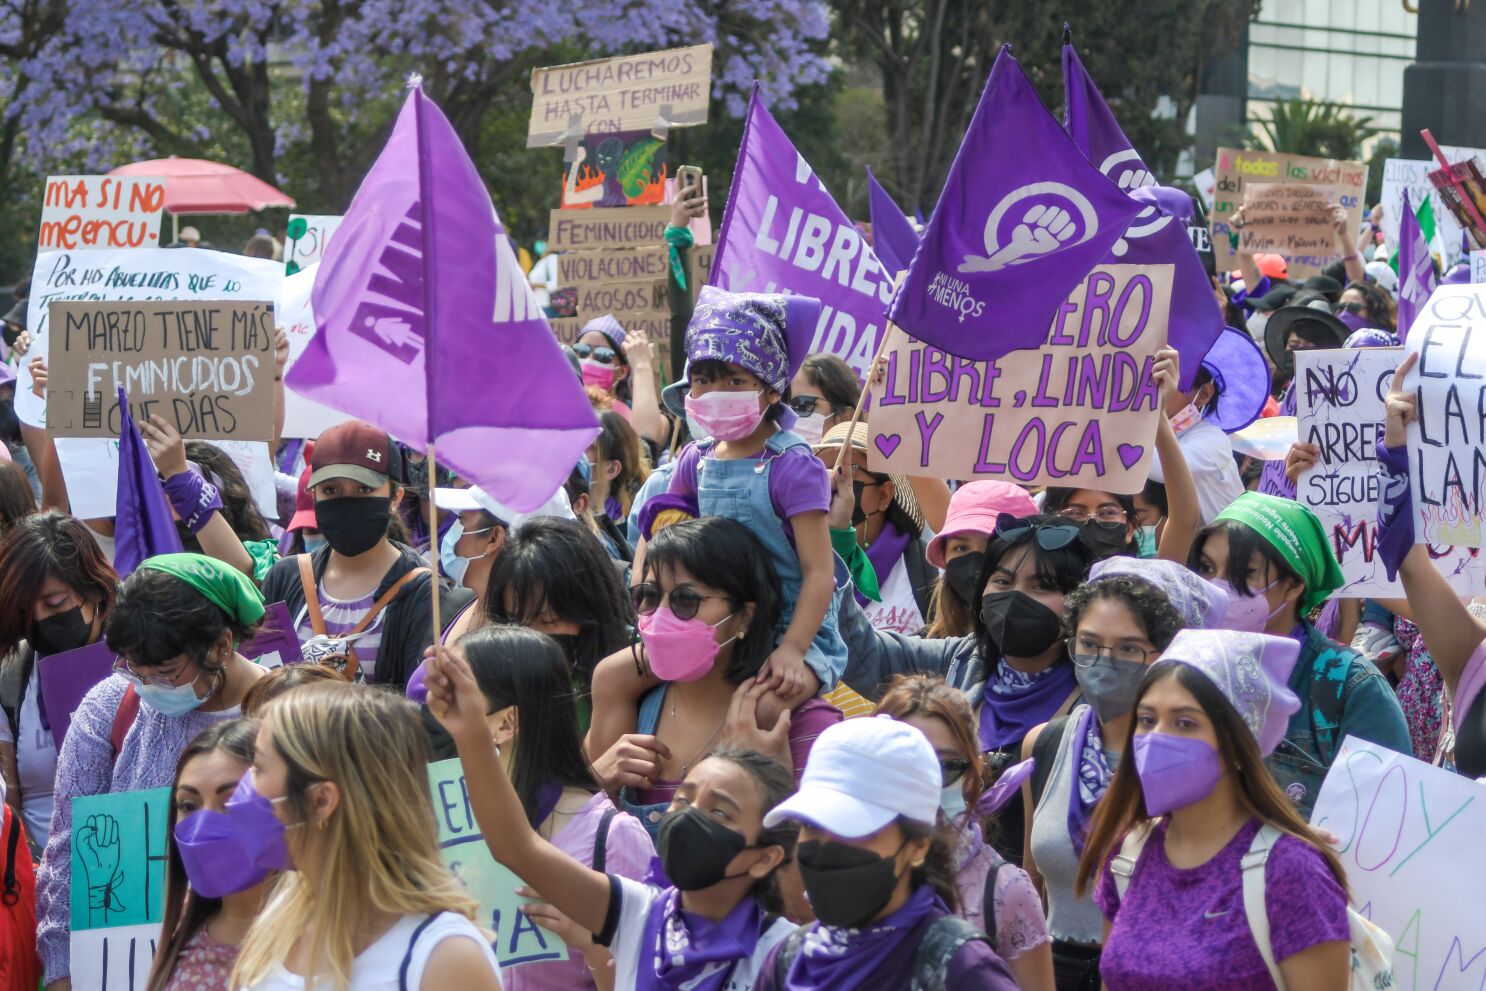 Thousands of feminists march in Mexico City: 'I am scared to simply be a woman in Mexico' - Los Angeles Times